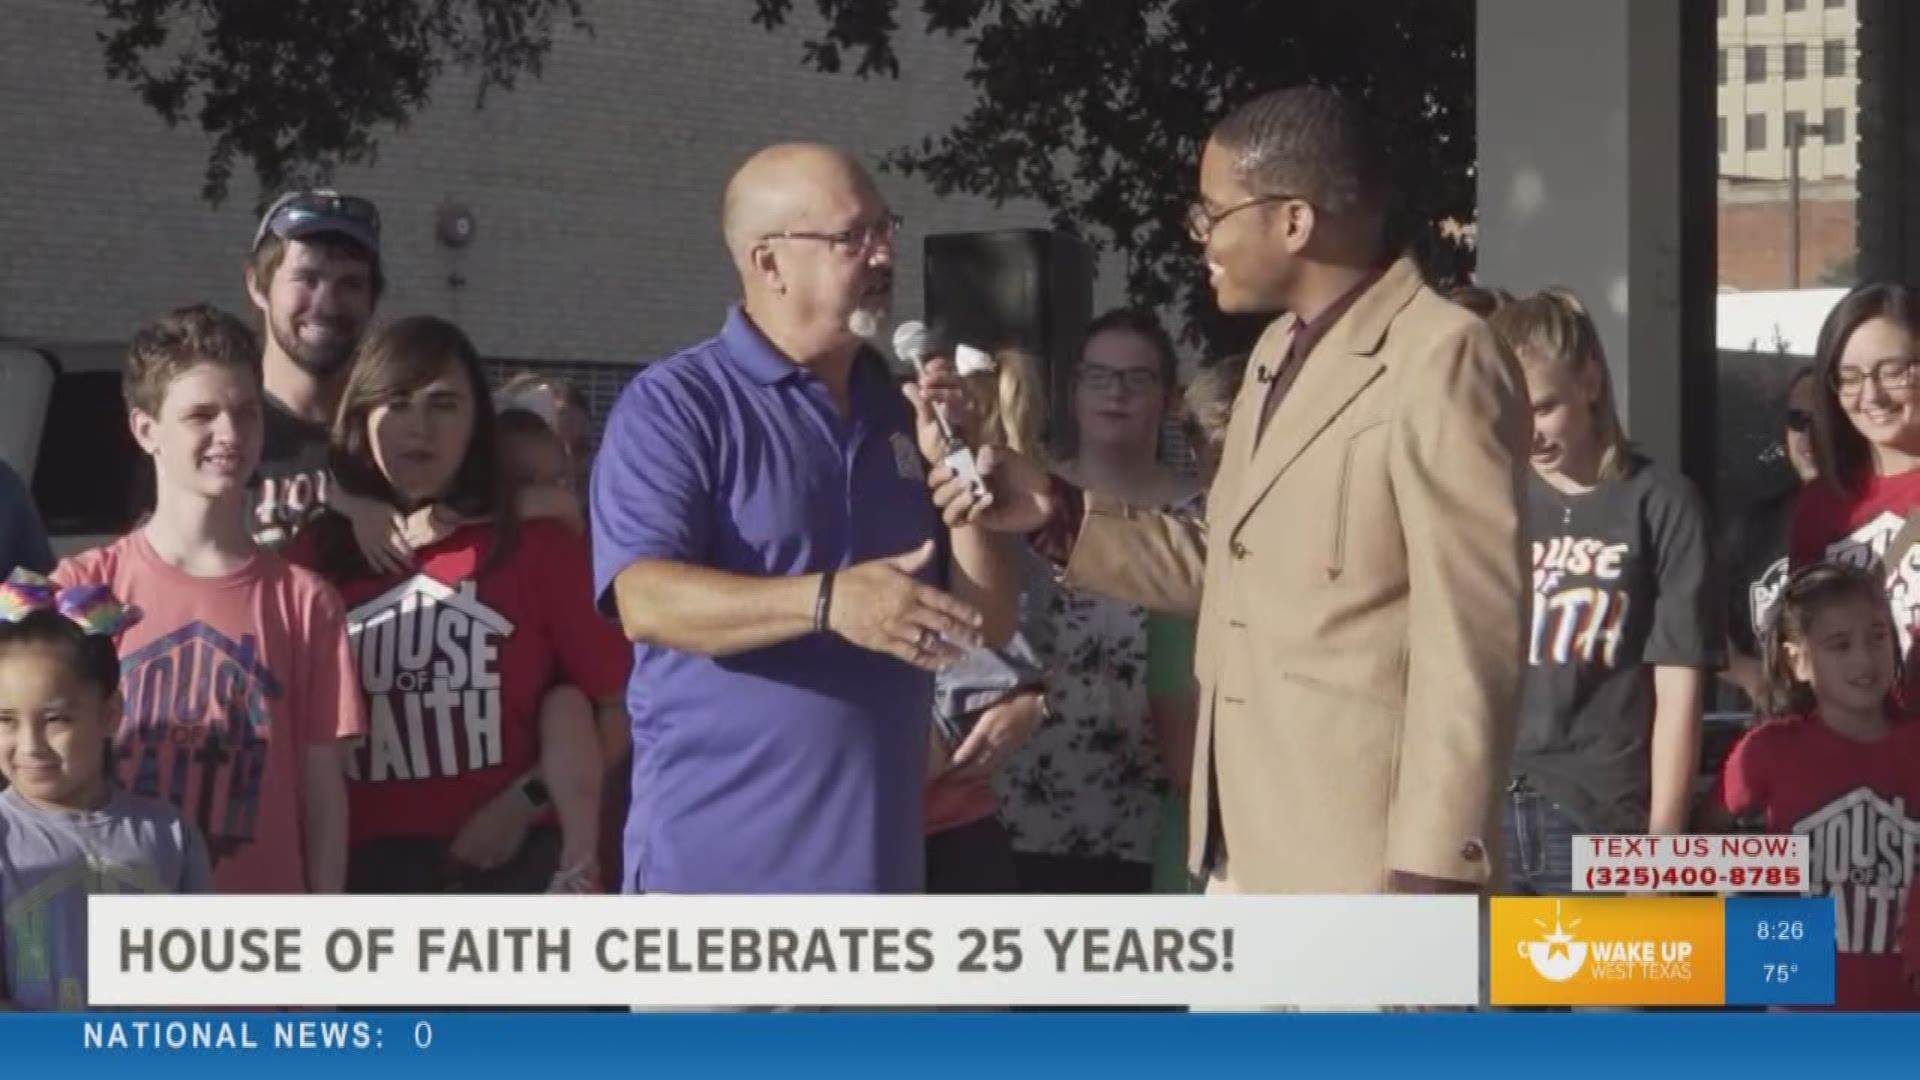 Our Malik Mingo spoke with the executive director of House of Faith about the upcoming 25 years celebration on August 23 from 3 p.m.-10 p.m. at the Bill Aylor Sr. Memorial Riverstage.